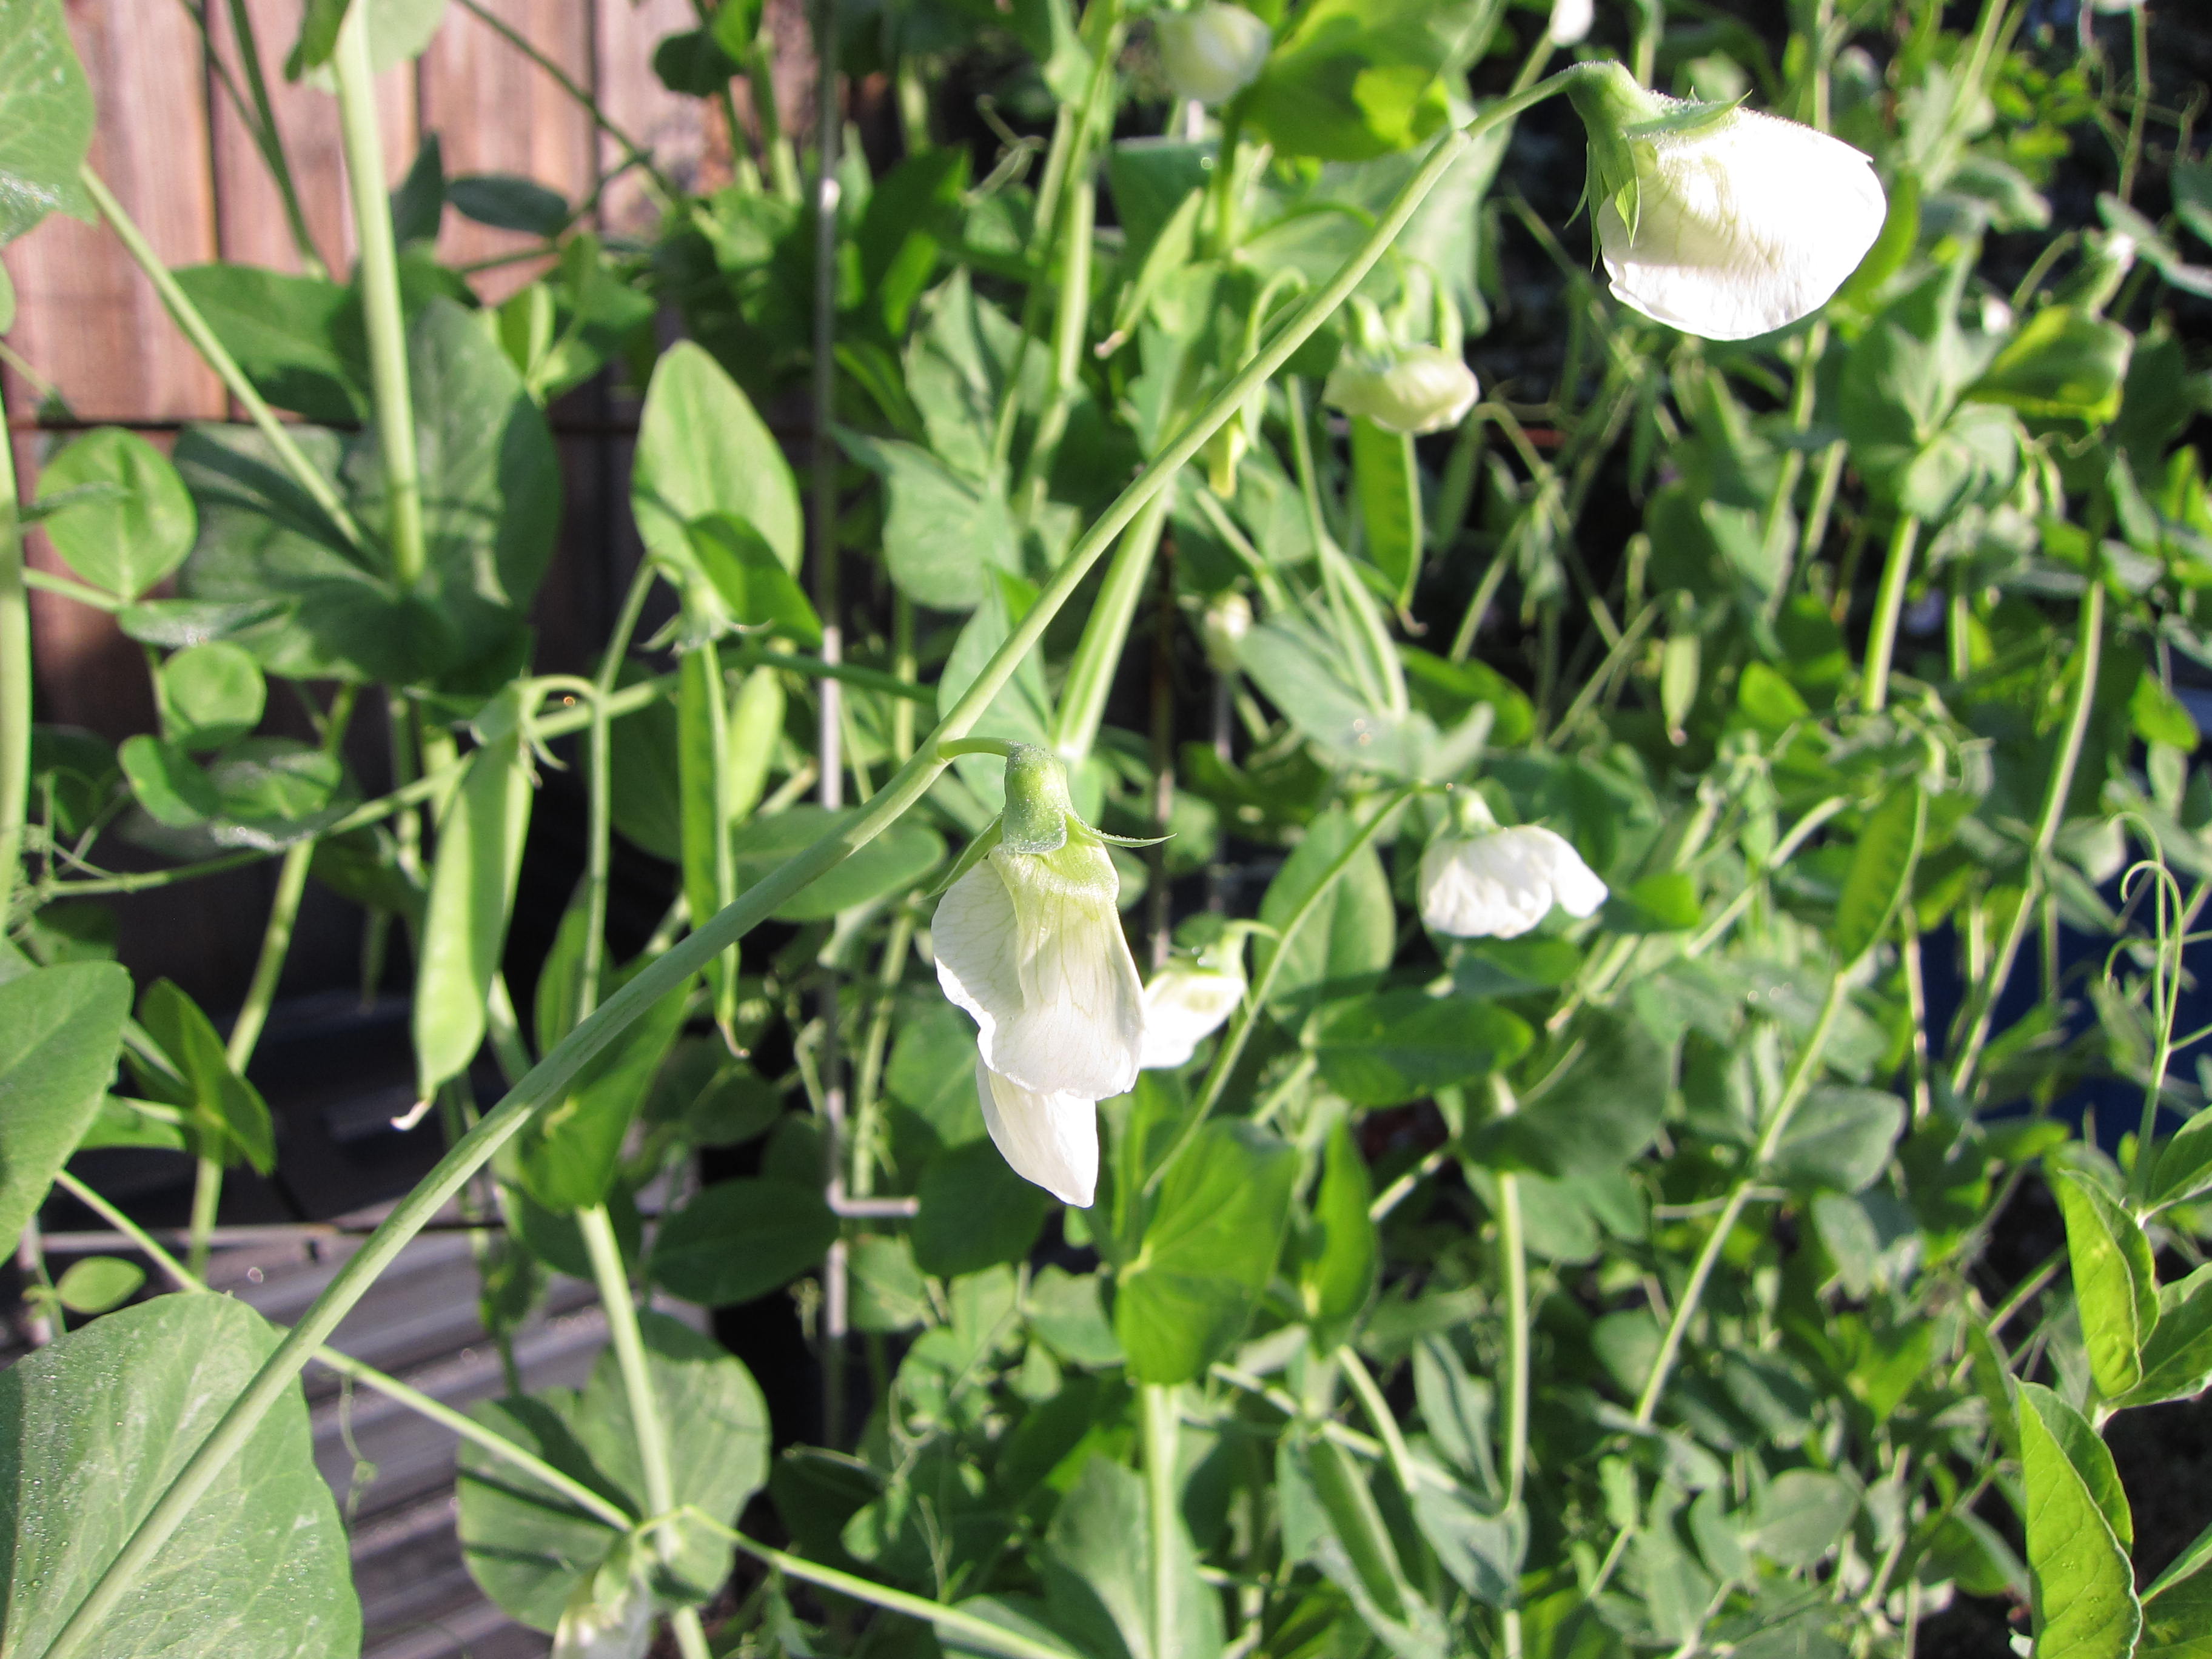 Alaska shelling peas say they don't need a trellis. I beg to differ. They've reached the top of a 6 foot trellis.